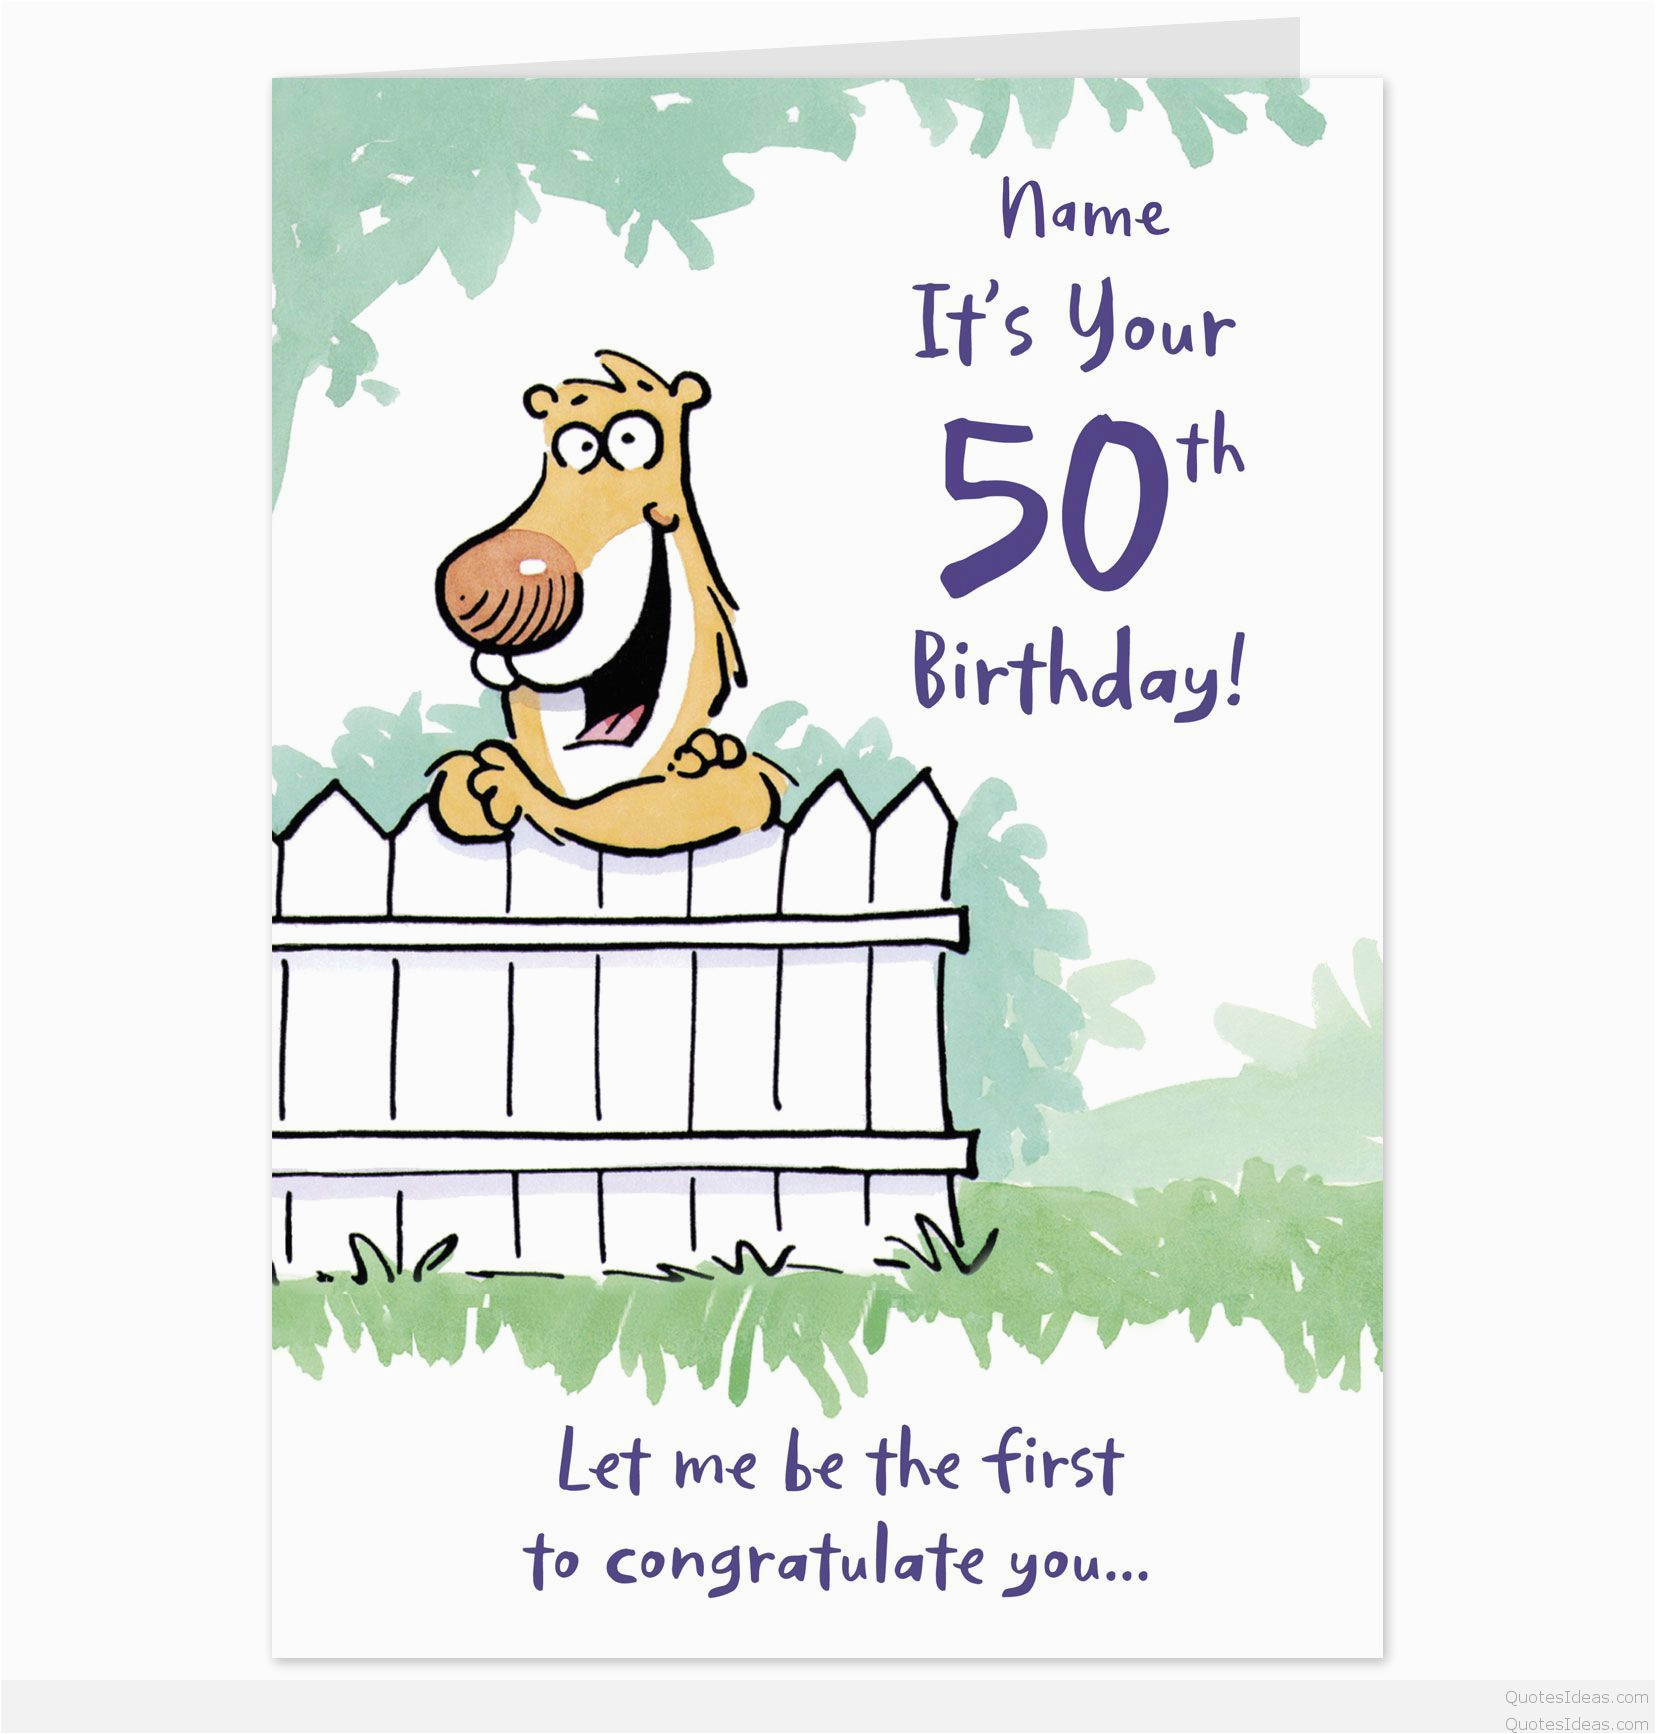 Friends Birthday Quotes Funny
 Funny Birthday Card Verses for Friends